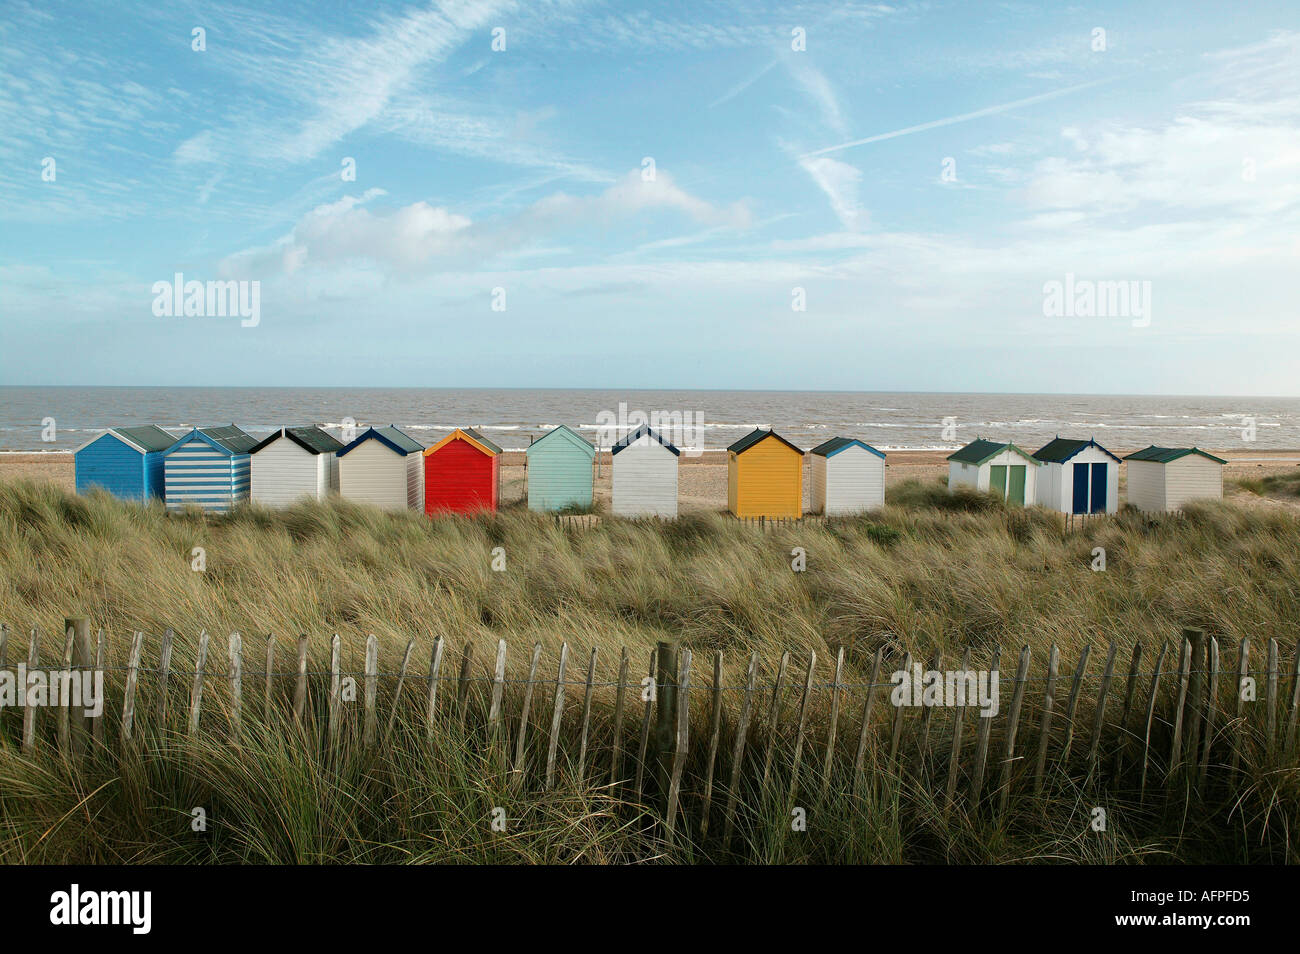 Line of beach huts on a windswept english southwold coastline popular with affluent tourists including bright colors Stock Photo